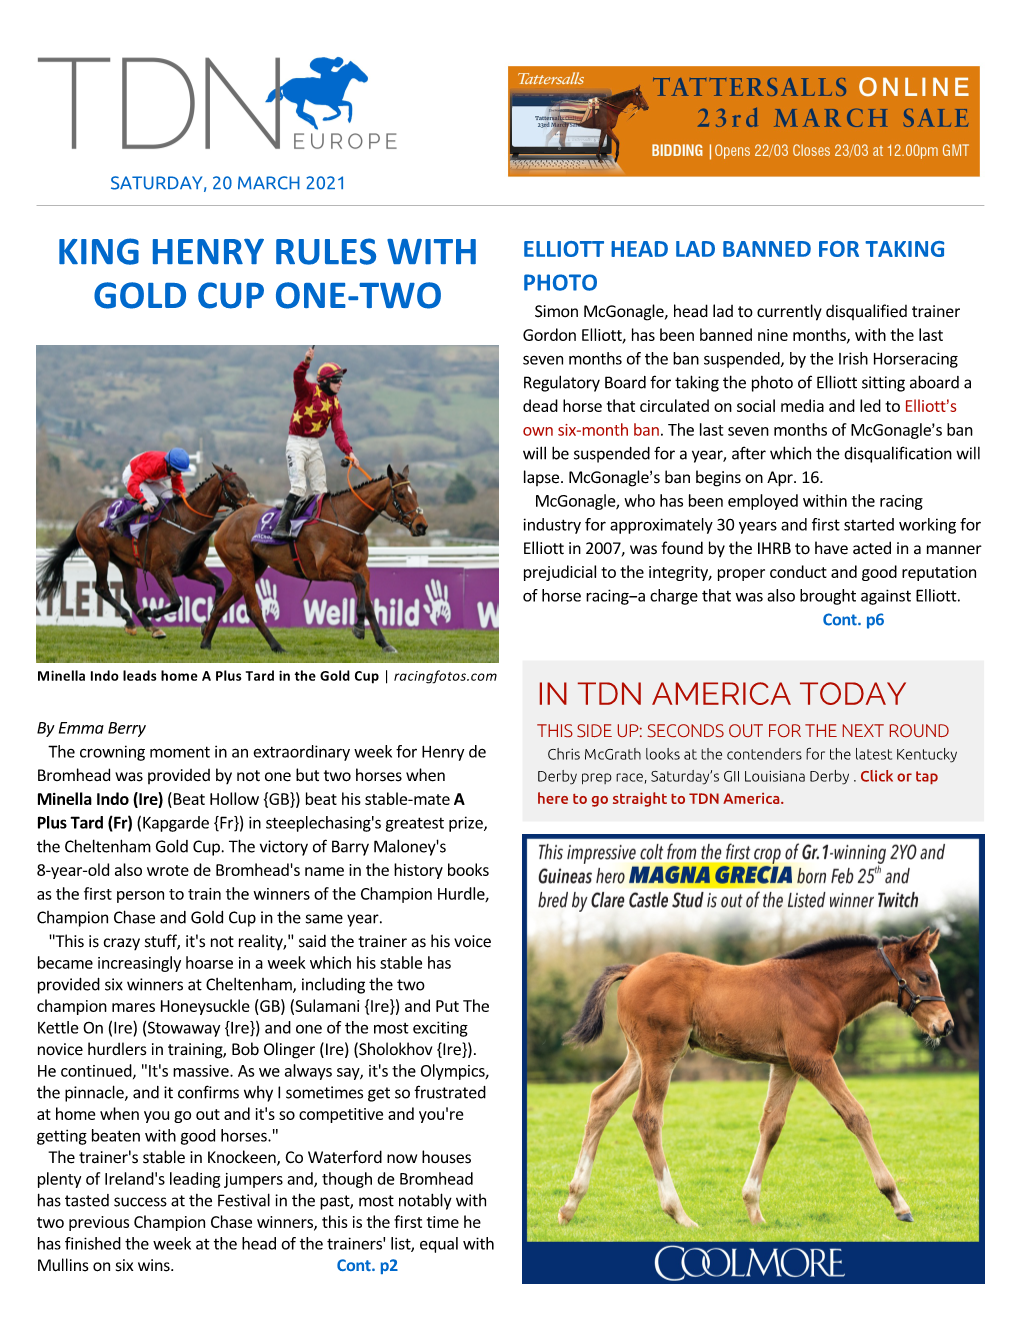 King Henry Rules with Gold Cup One-Two Cont